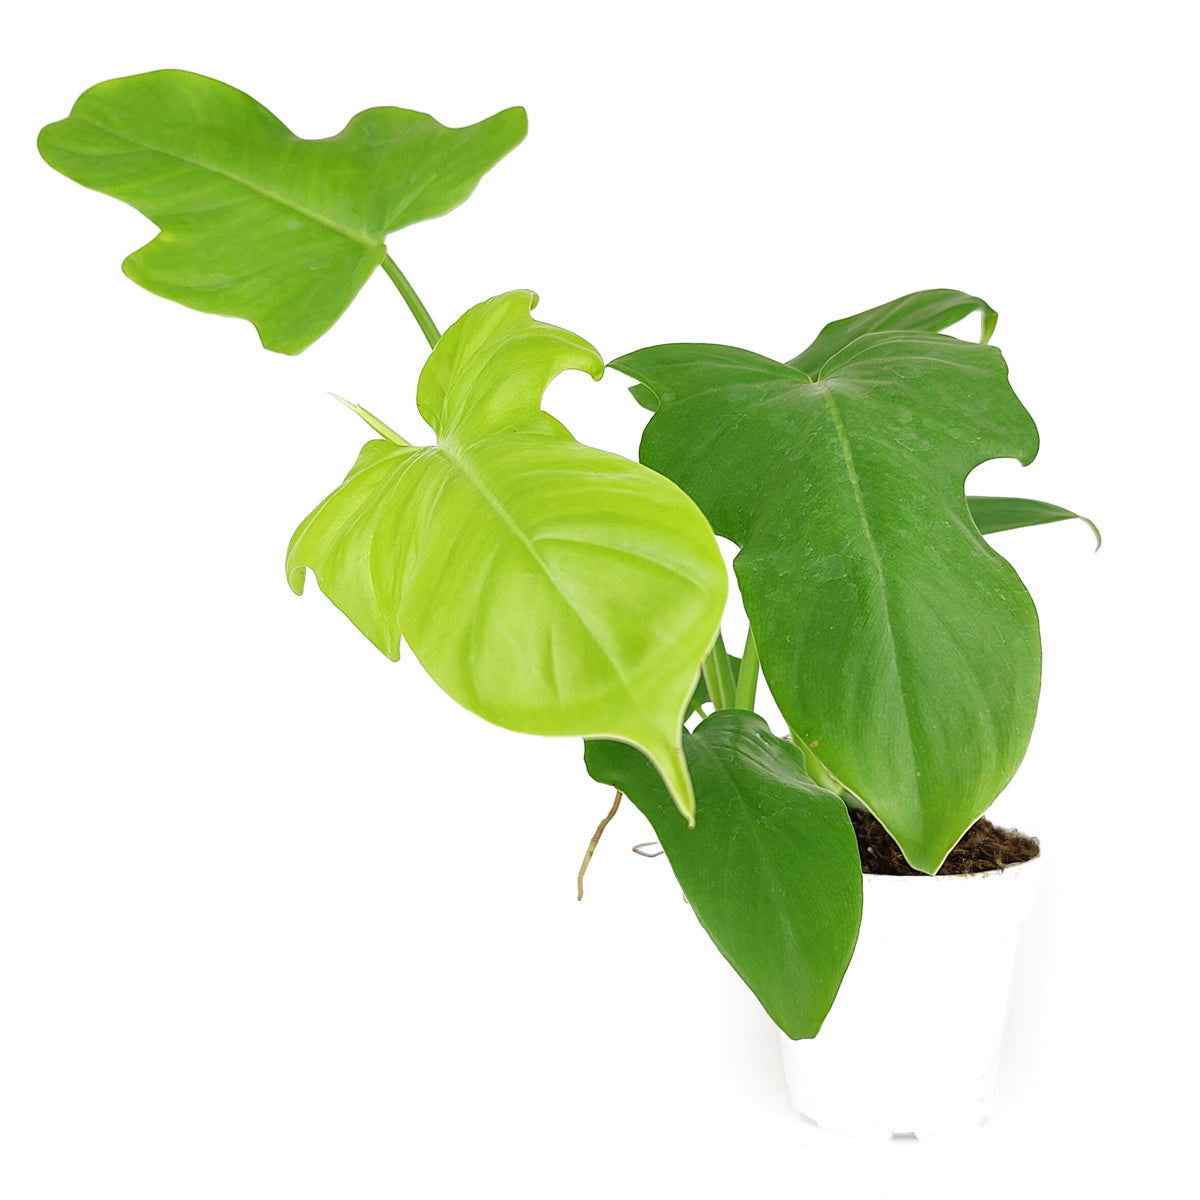 philodendron golden violin care, philodendron bipennifolium common name, philodendron bipennifolium price, bipennifolium aurea philodendron, philodendron bipennifolium golden